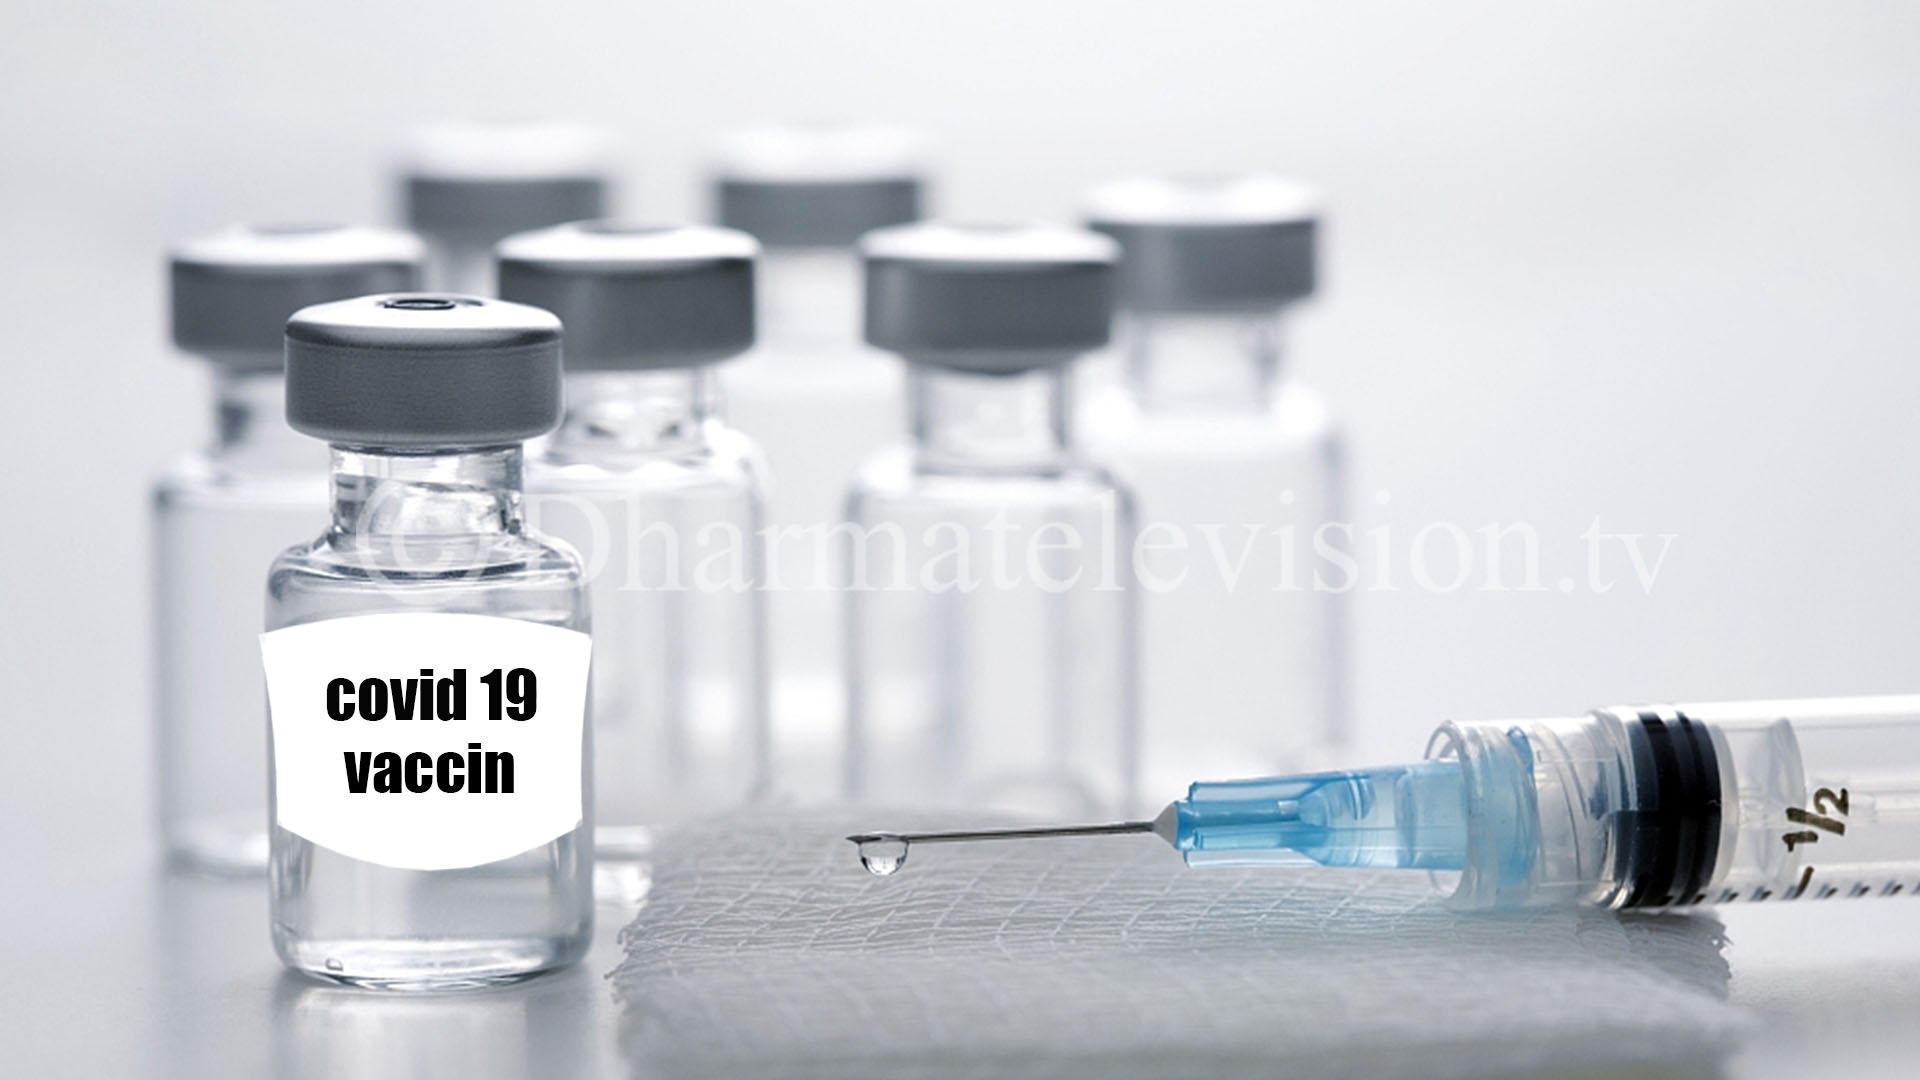 Covid-19 Vaccine Update from India, Israel and the UK